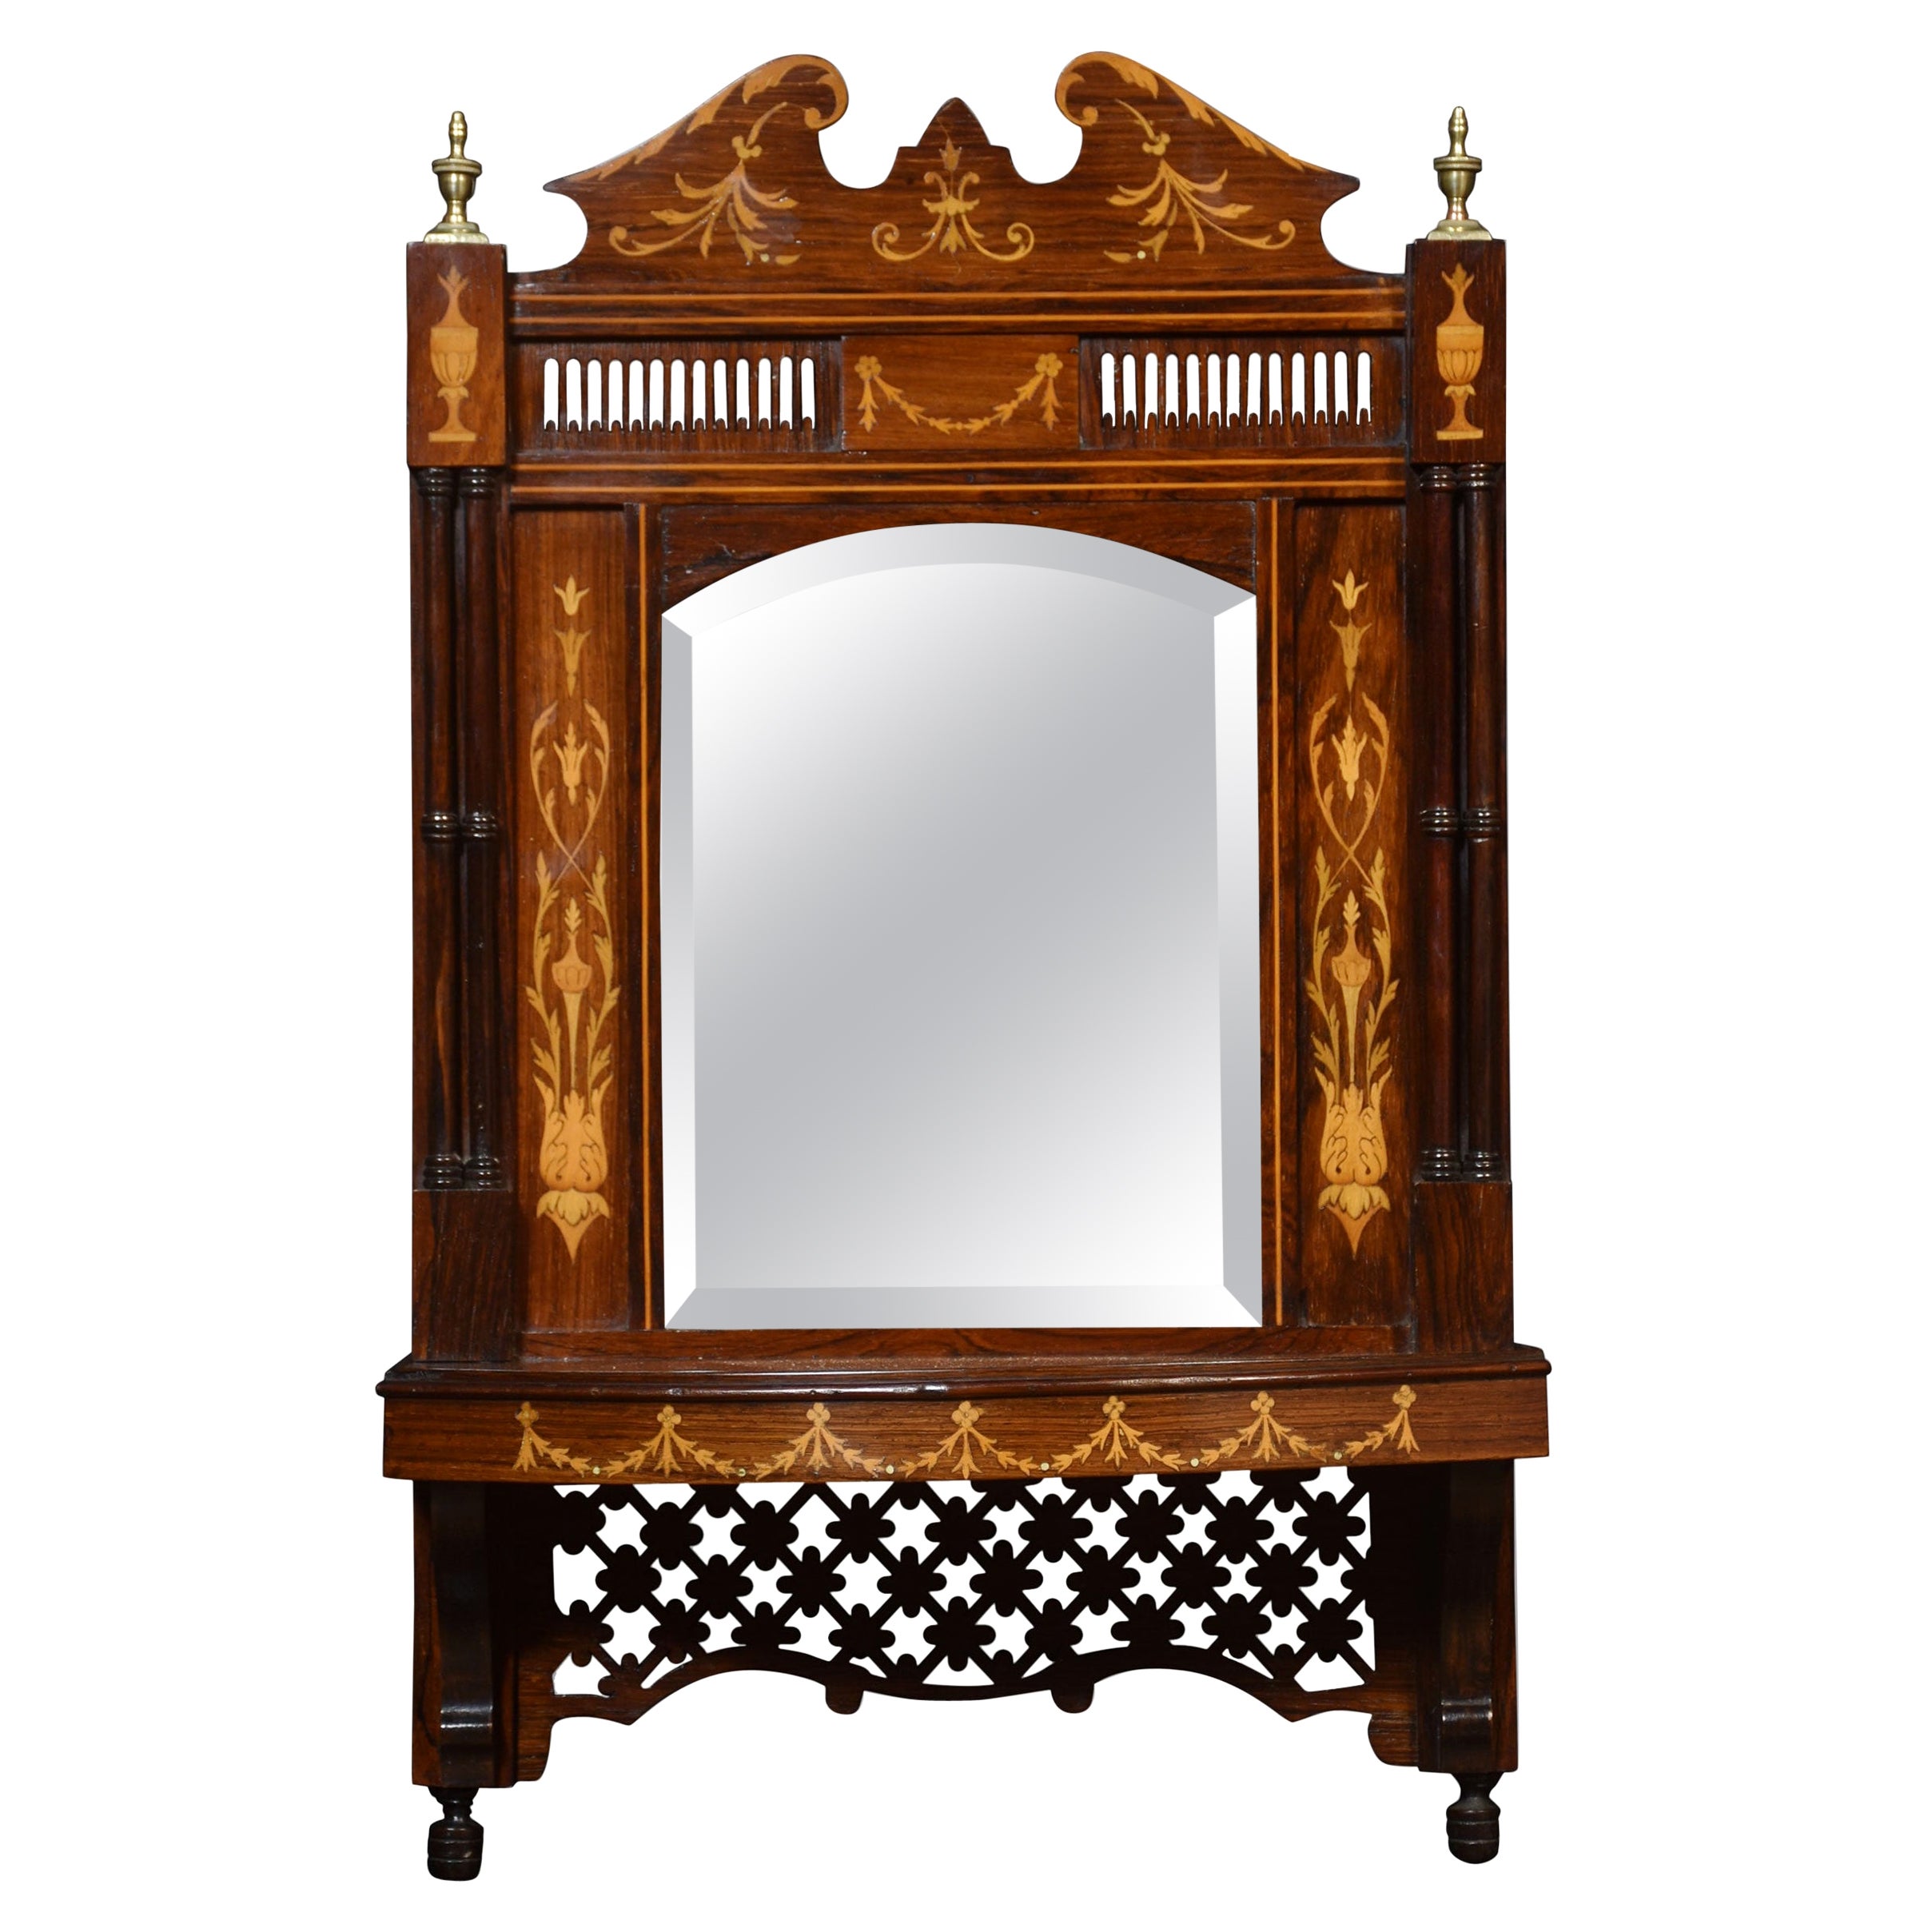 Inlaid Wall Mirror For Sale